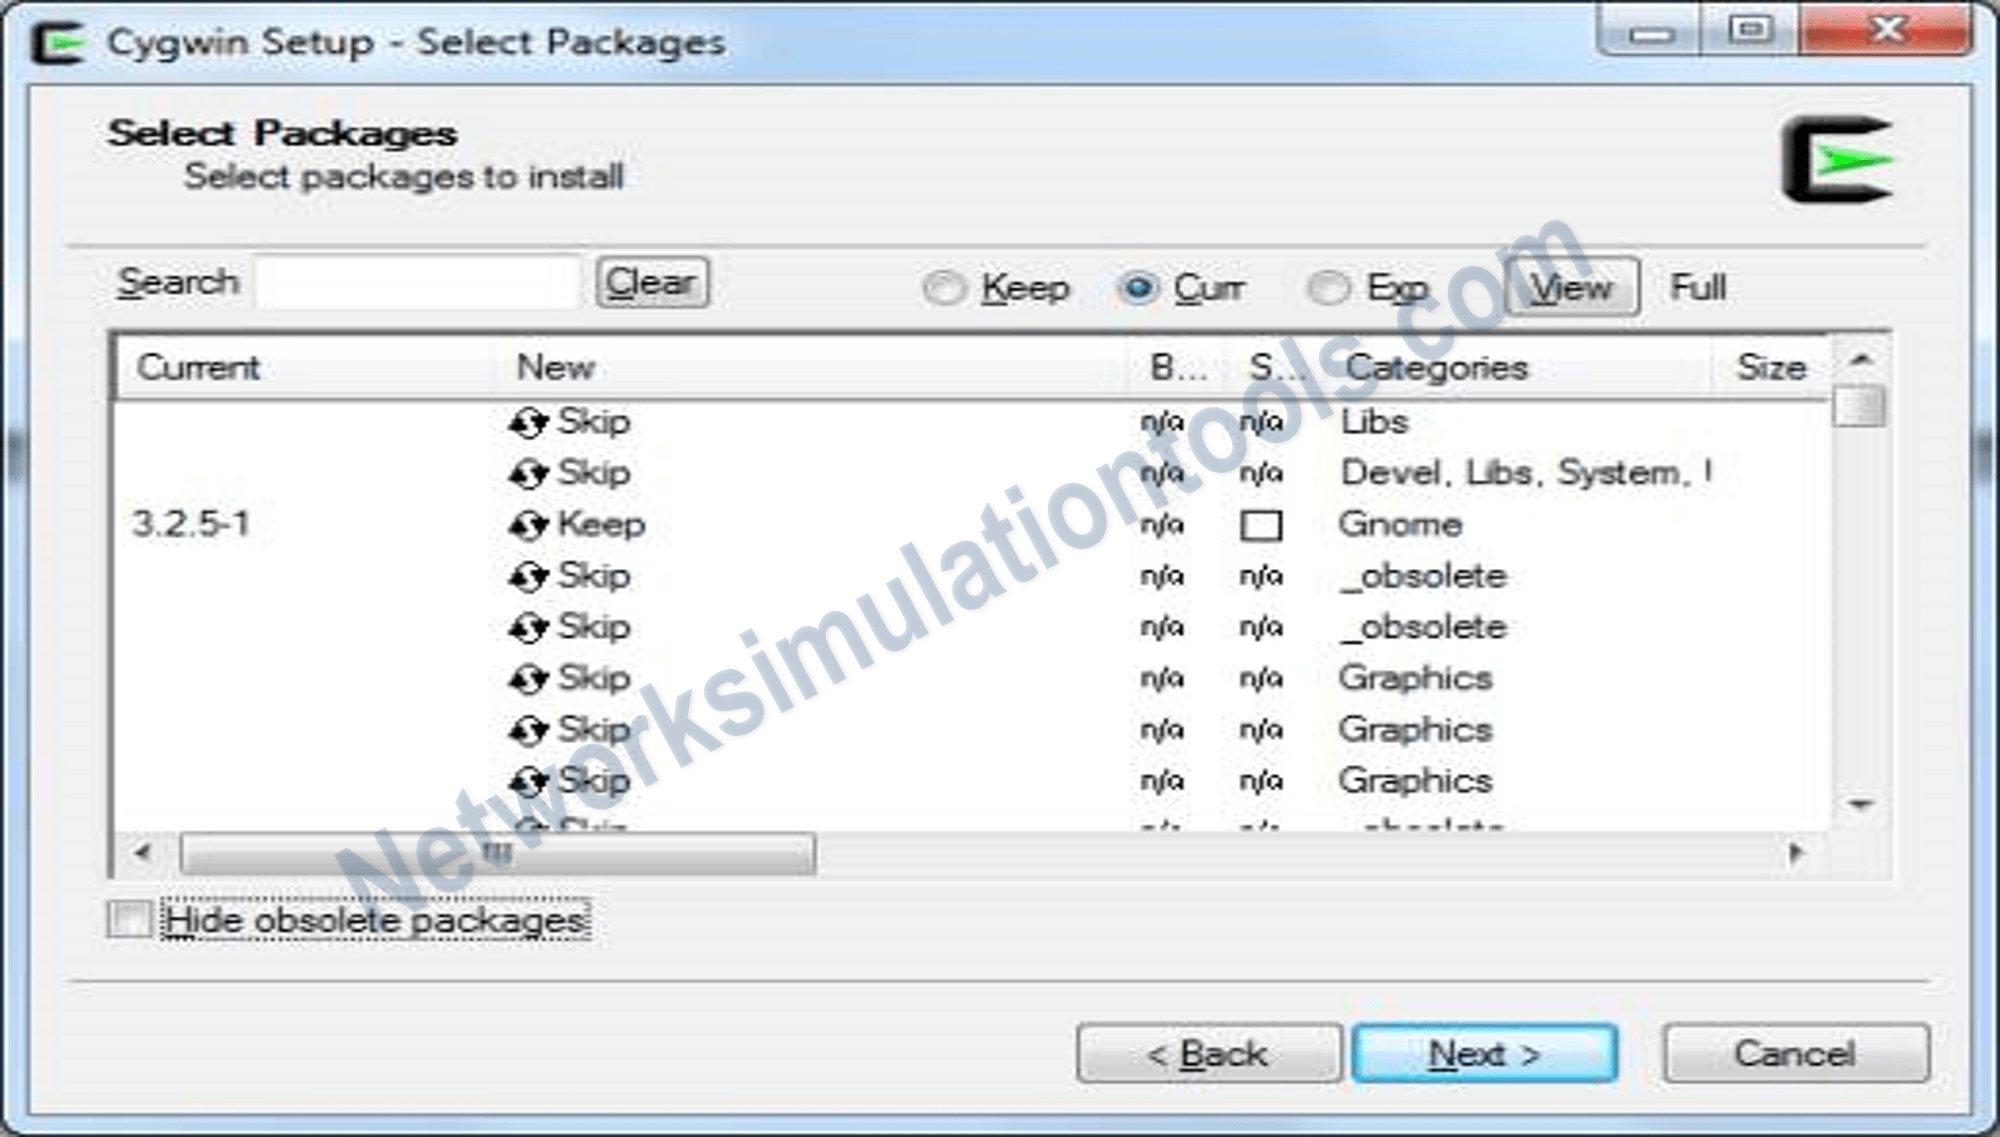 Uncheck the option Hide obsolete packages